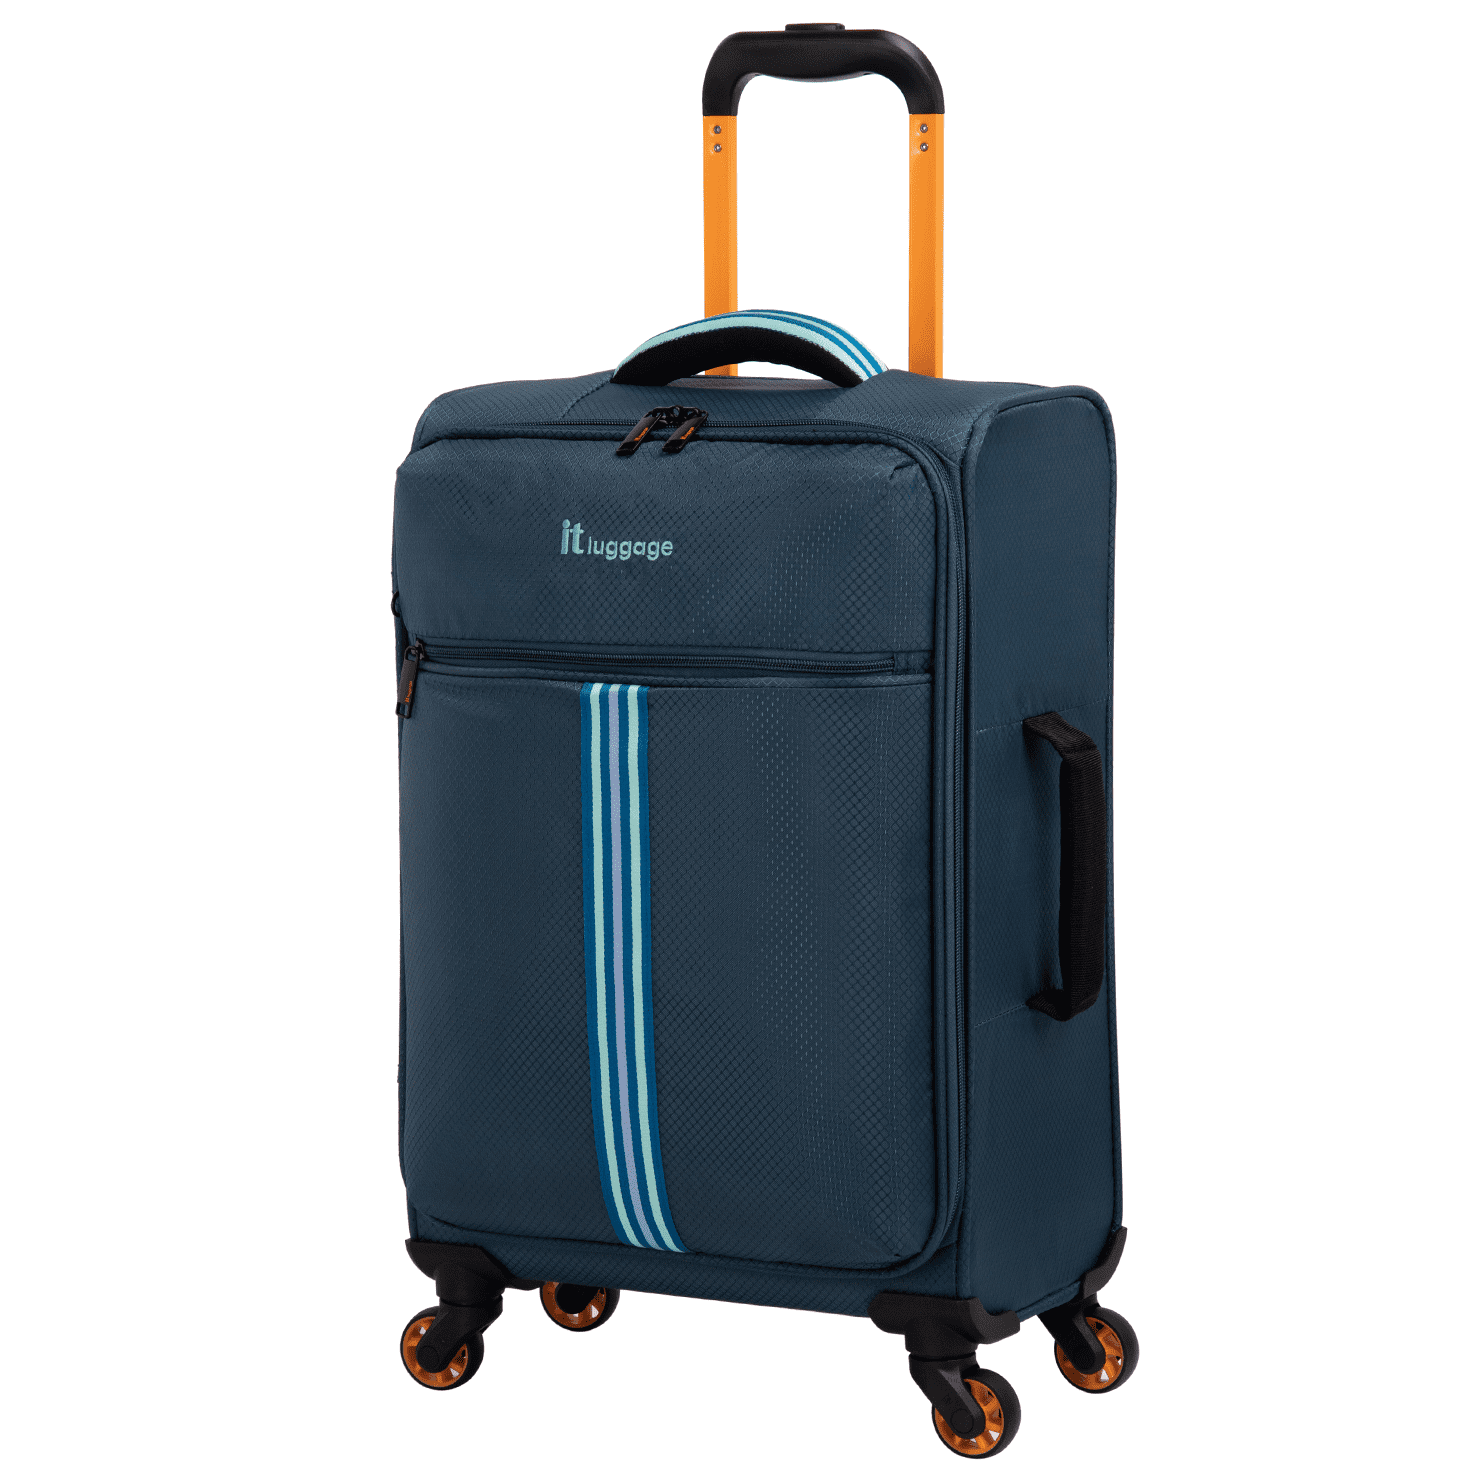  Sherpani Latitude, 22 Inch Travel Soft Side Luggage, Durable  Luggage, Suitcases with Wheels, Lightweight Rolling Luggage Carry On, Carry  On Luggage 22x14x9 Airline Approved (Teal)